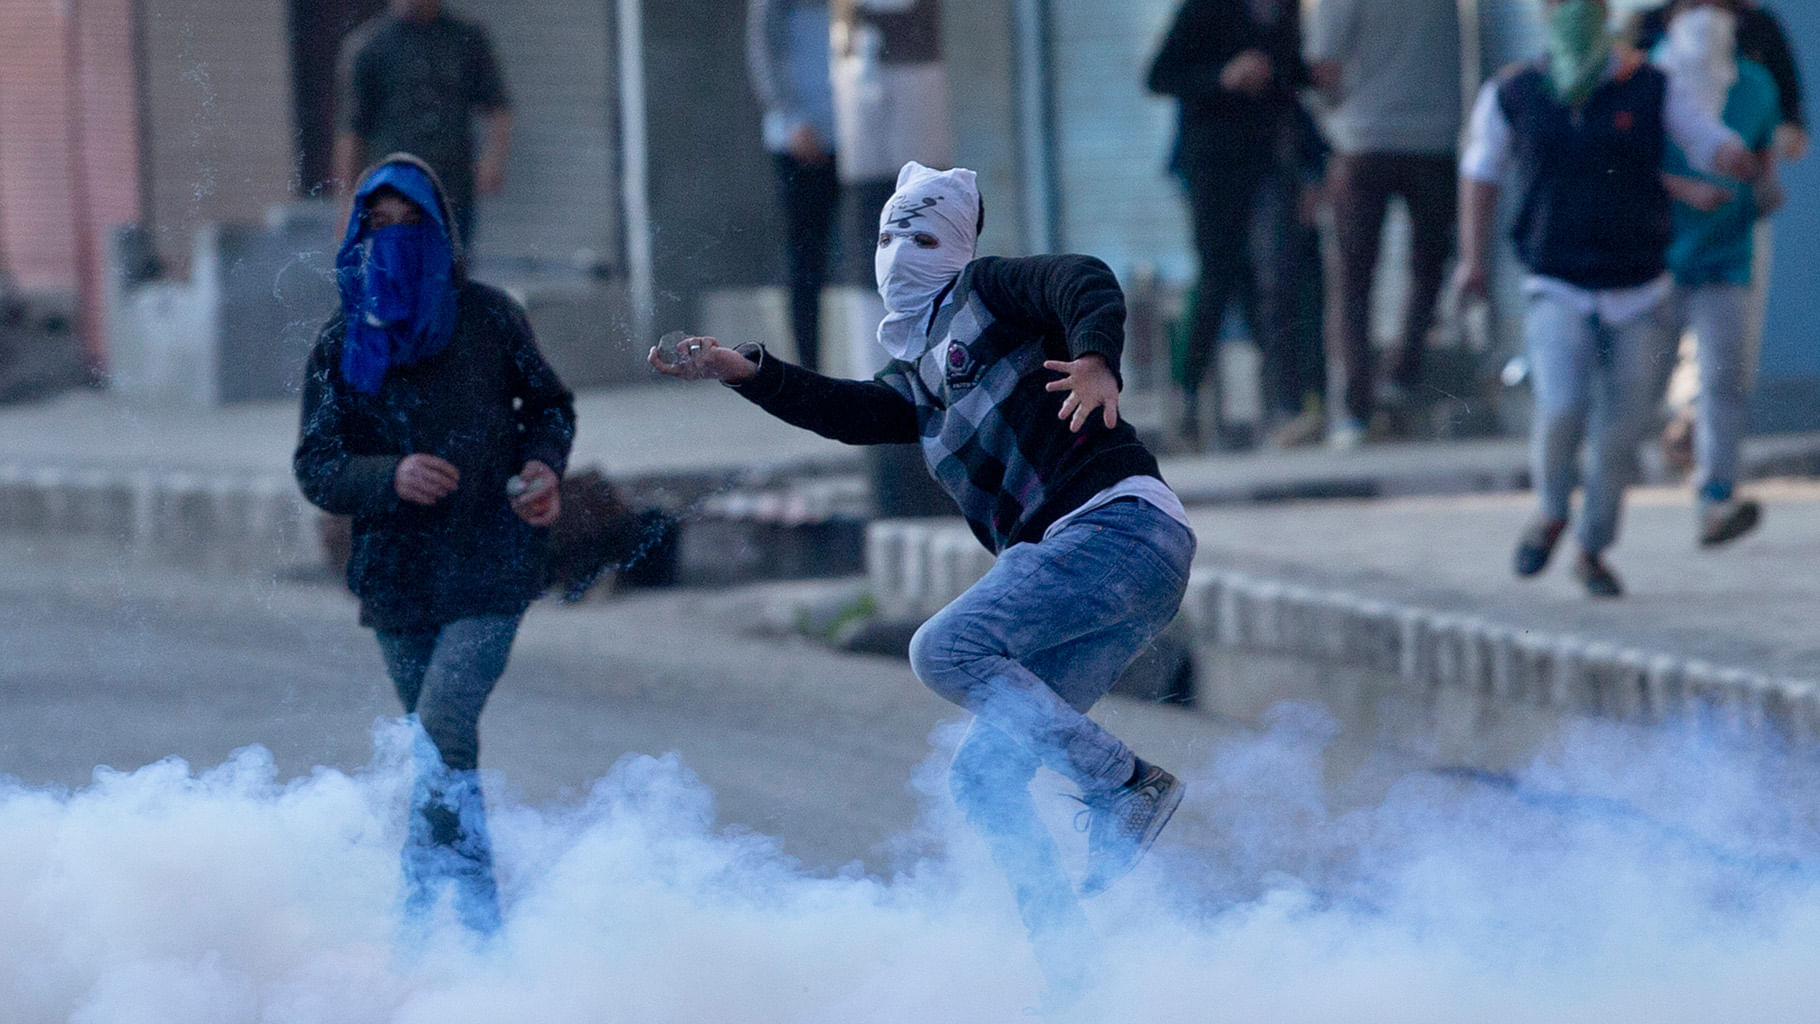 Handwara in Kashmir has been at the centre of major unrest since Tuesday, 12 April, 2016.(Photo:AP)